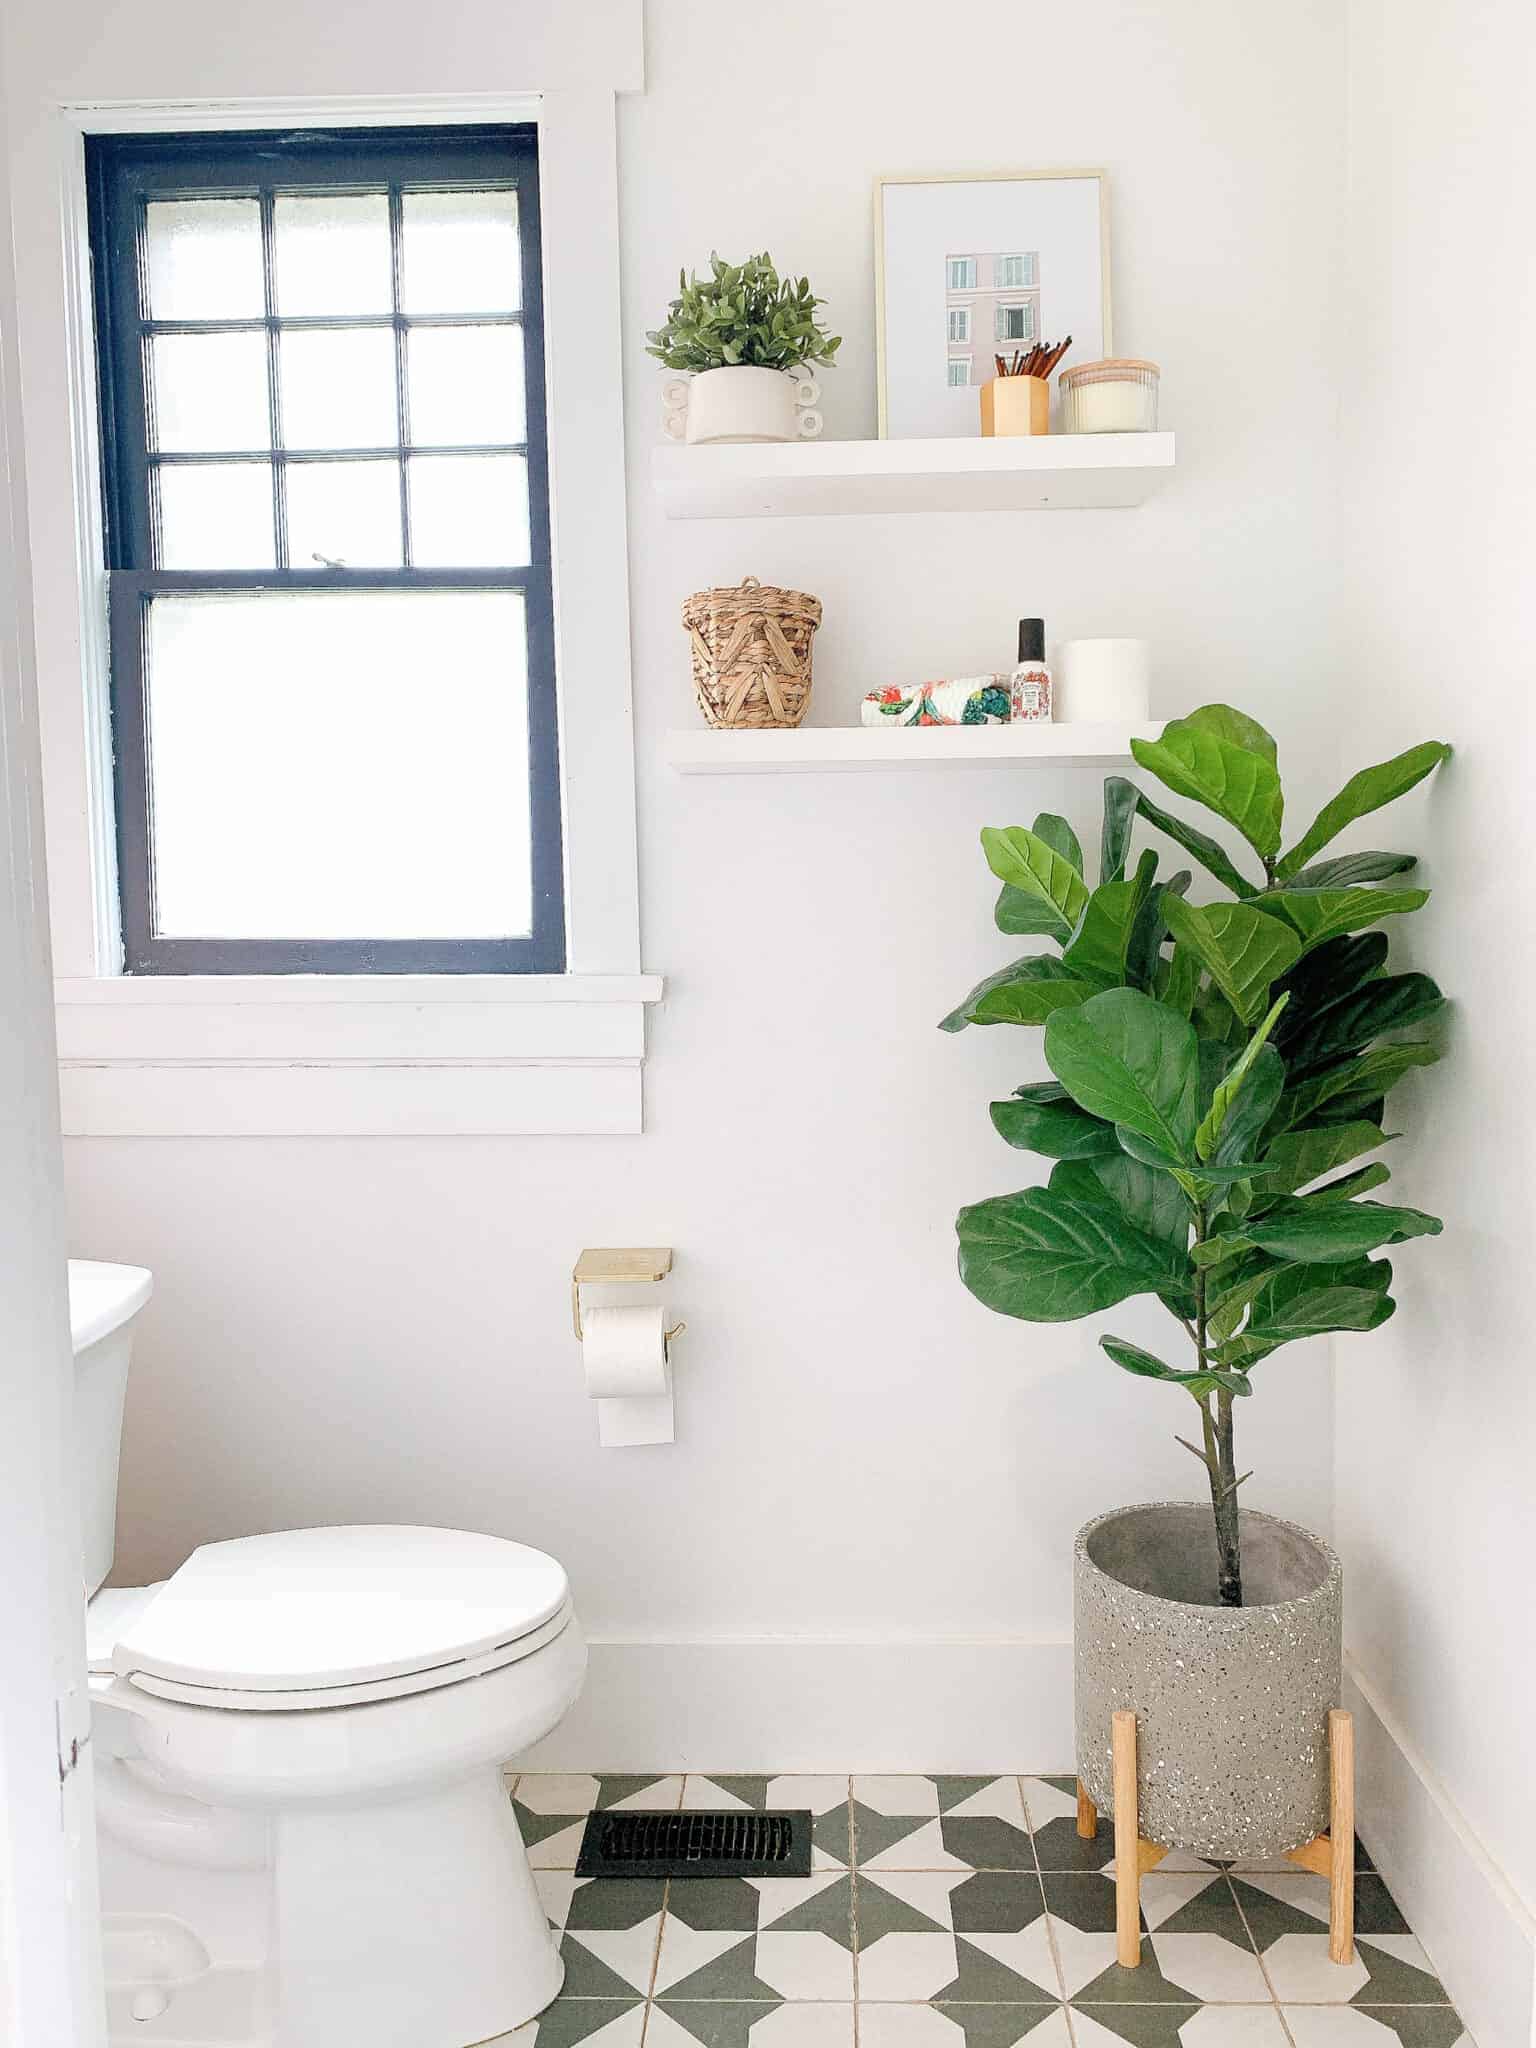 How To Decorate Bathroom Shelves - Through My Front Porch